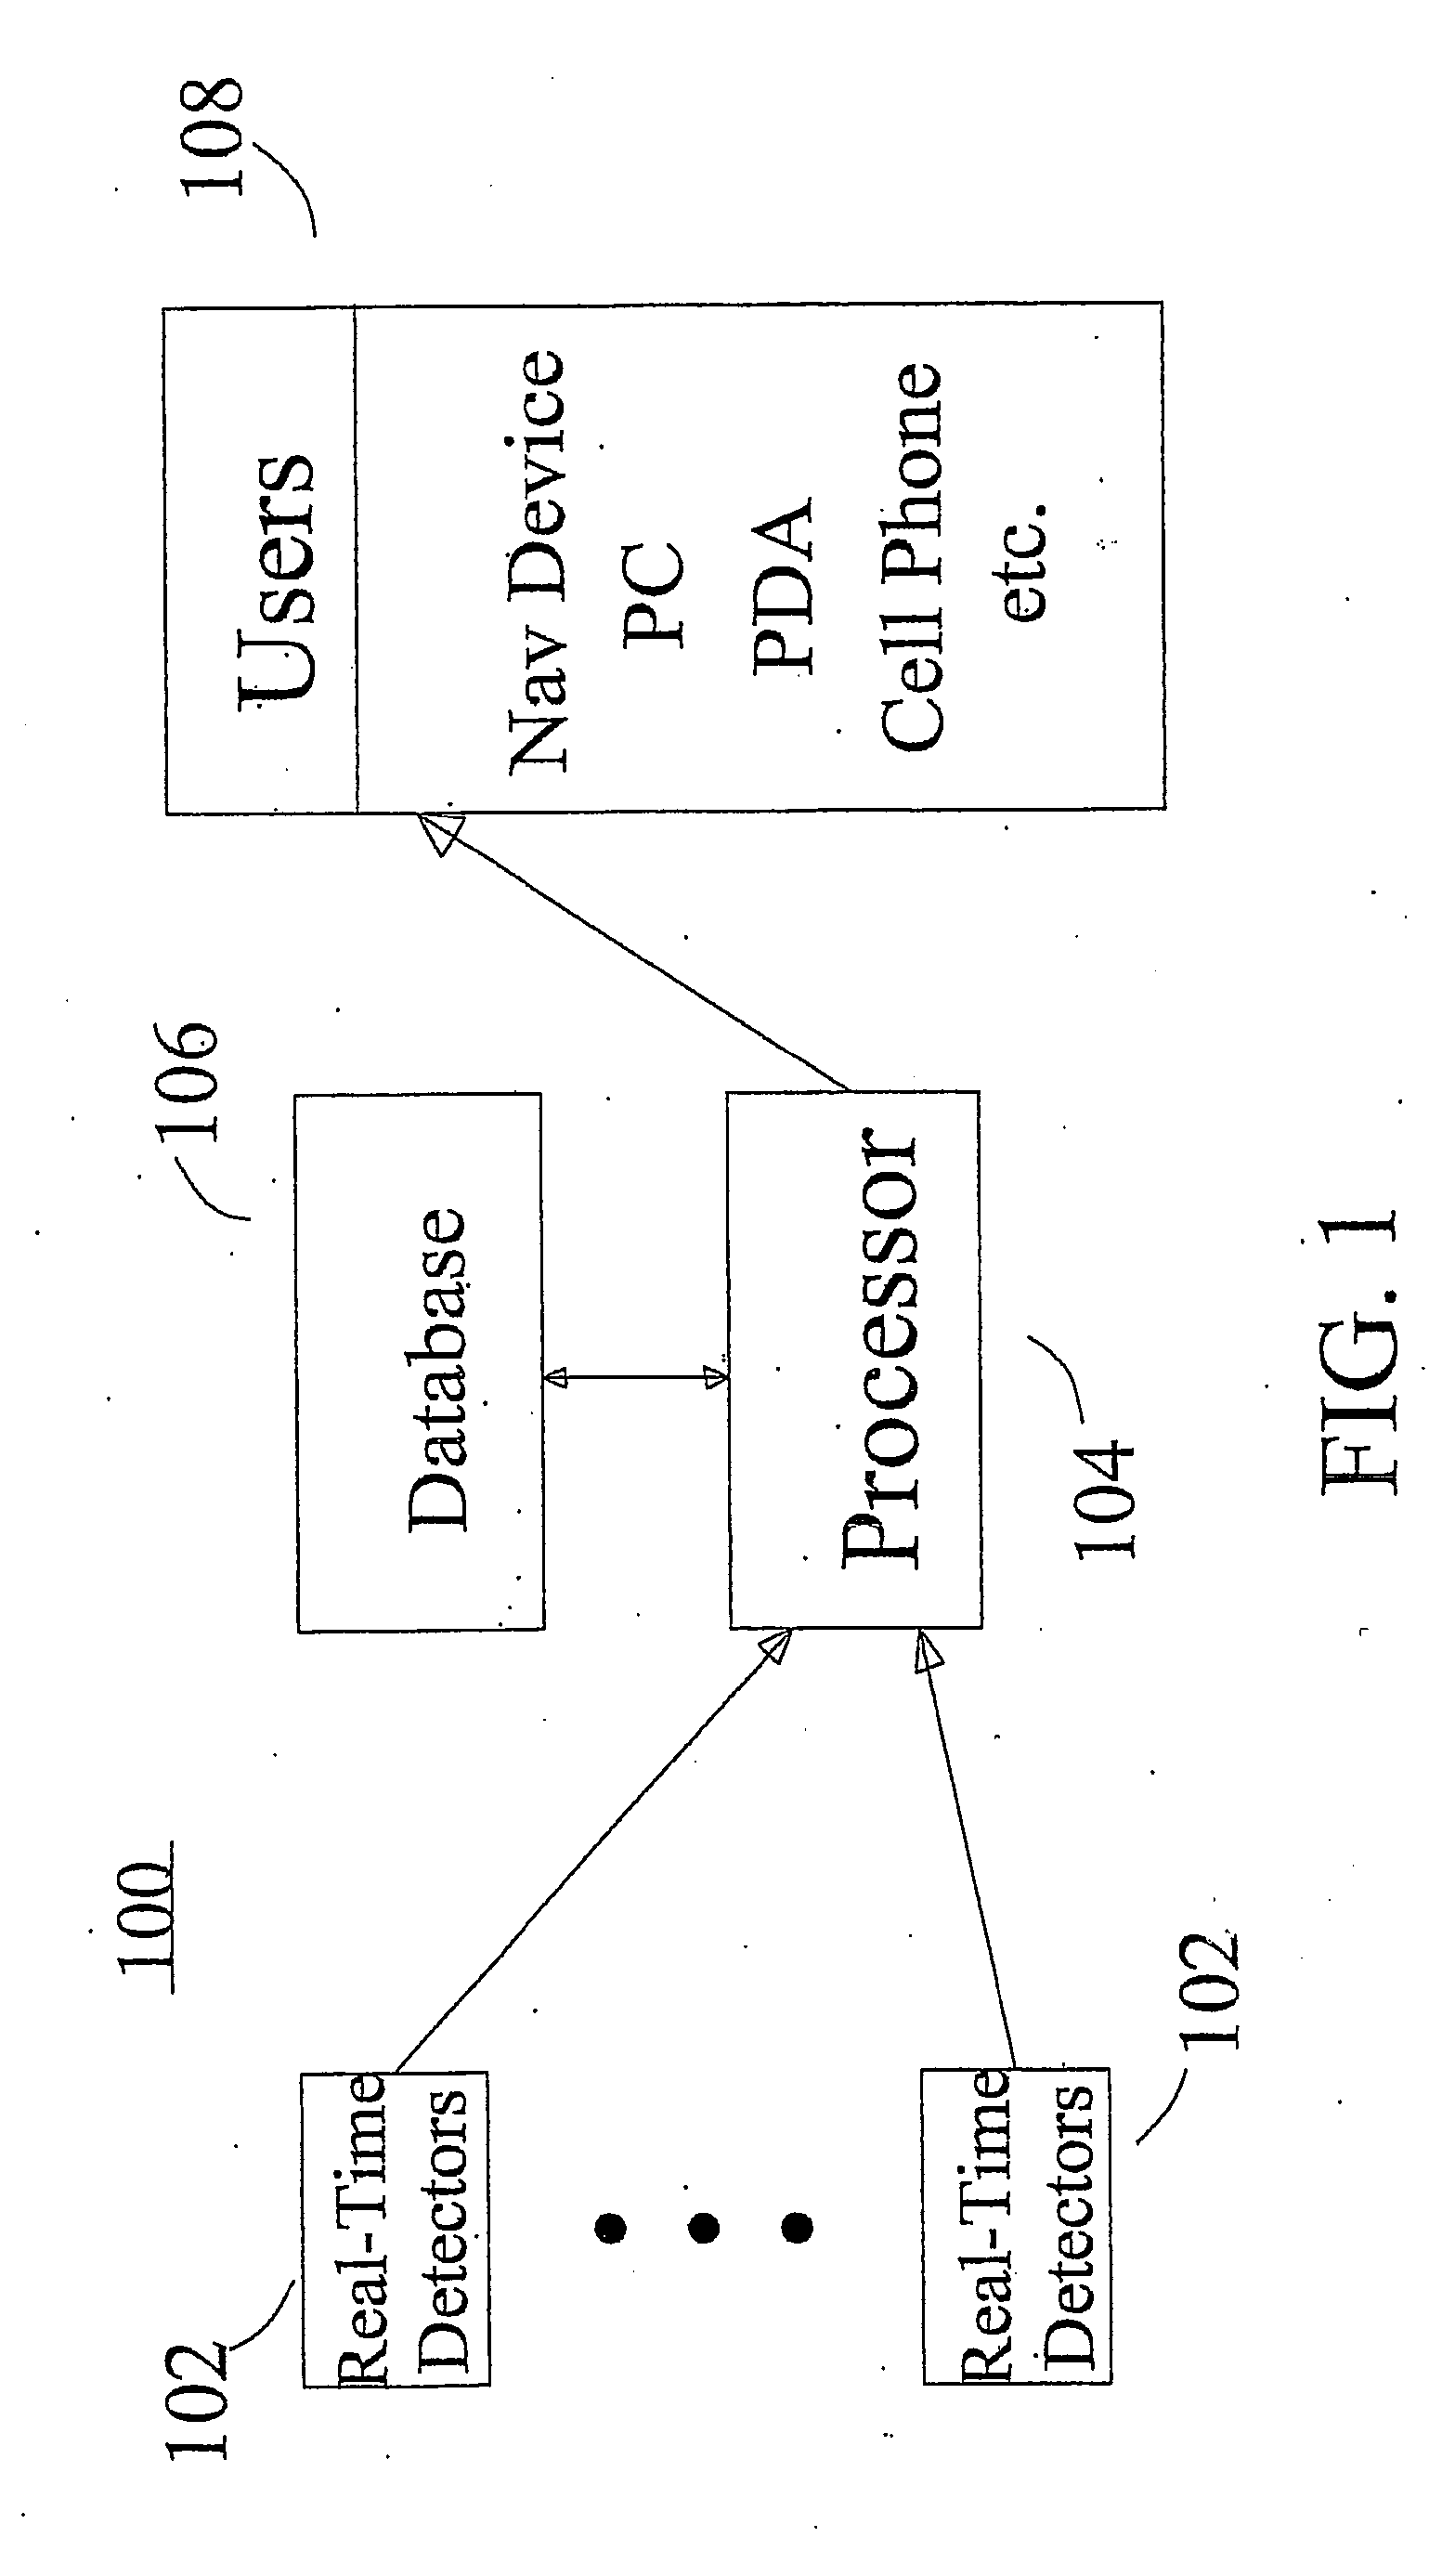 System and method for predicting parking spot availability